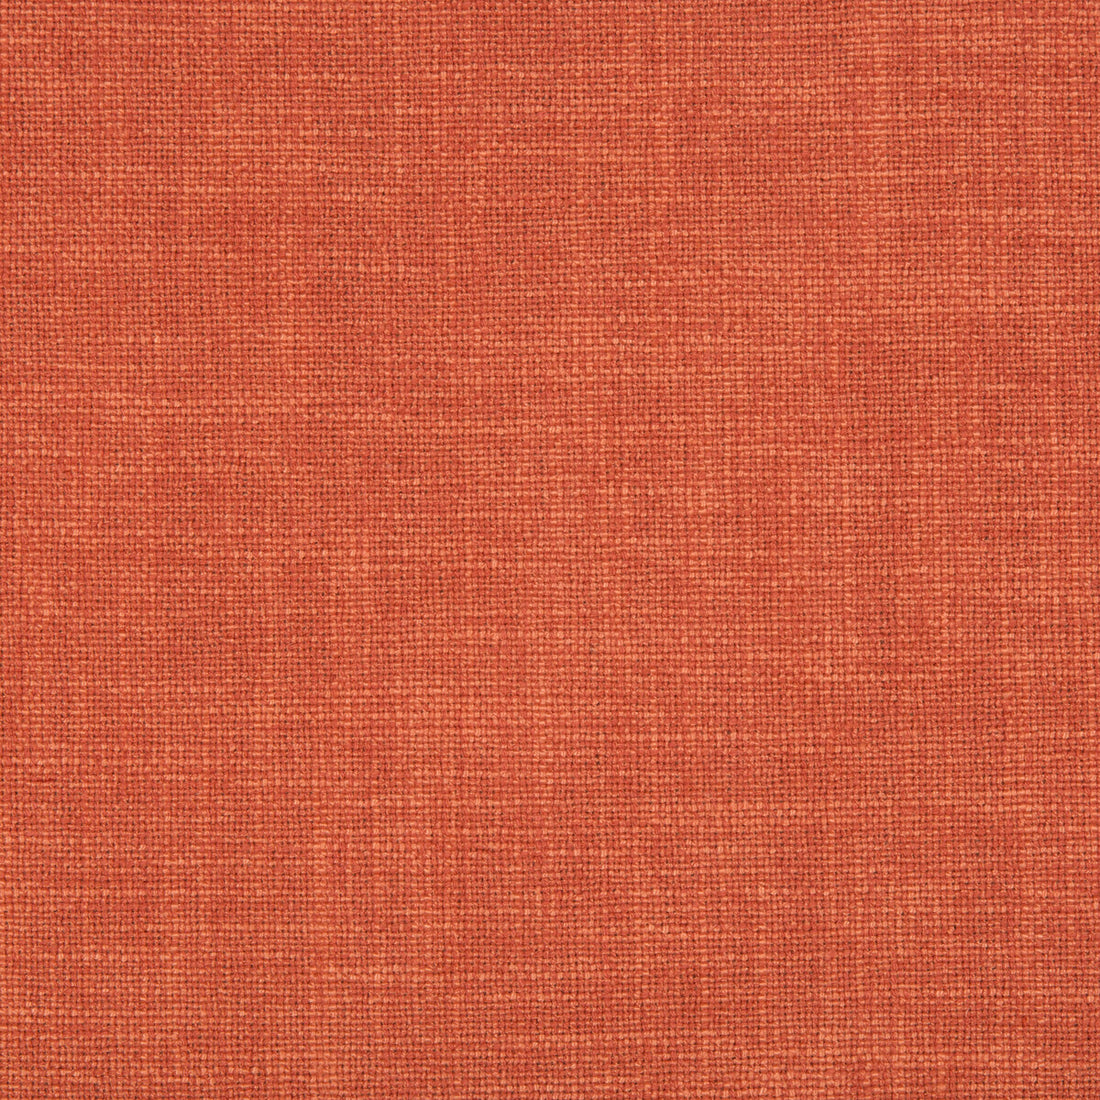 Everywhere fabric in cinnabar color - pattern 34587.12.0 - by Kravet Basics in the Thom Filicia Altitude collection